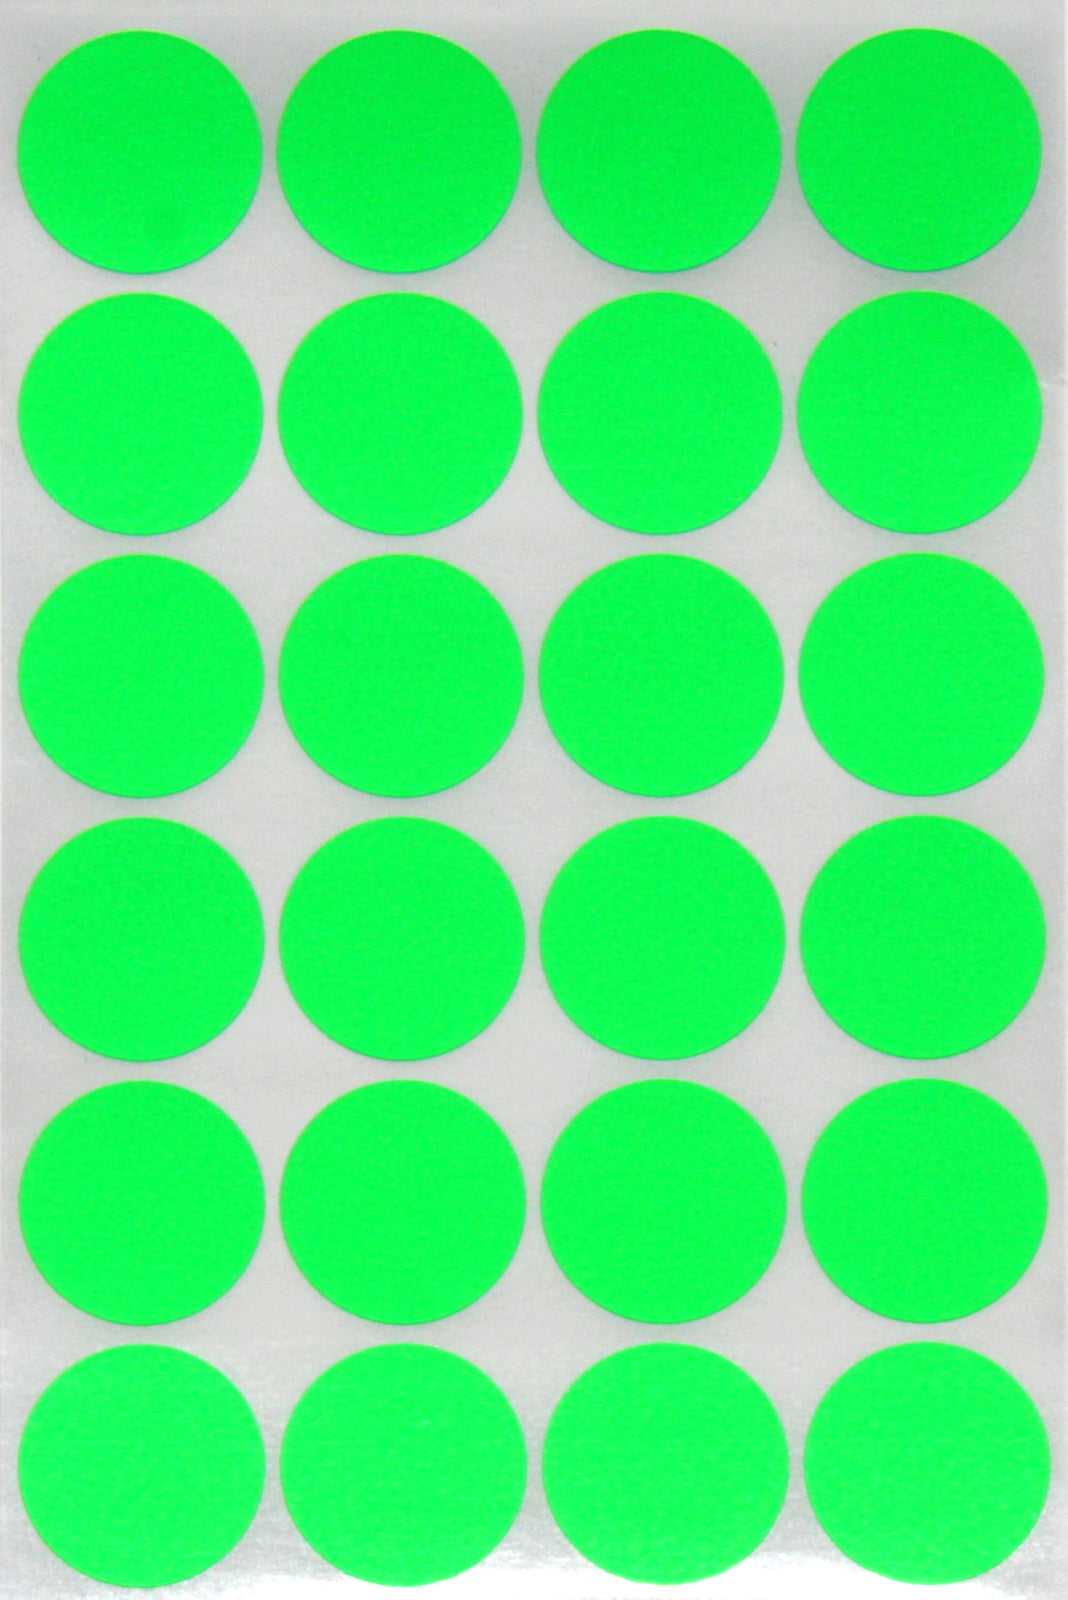 Colored Dot Stickers 1/2 inch Round Labels Circle Sticker in 8 Colors, 16  Sheets Total, 1280 Pack by Royal Green 